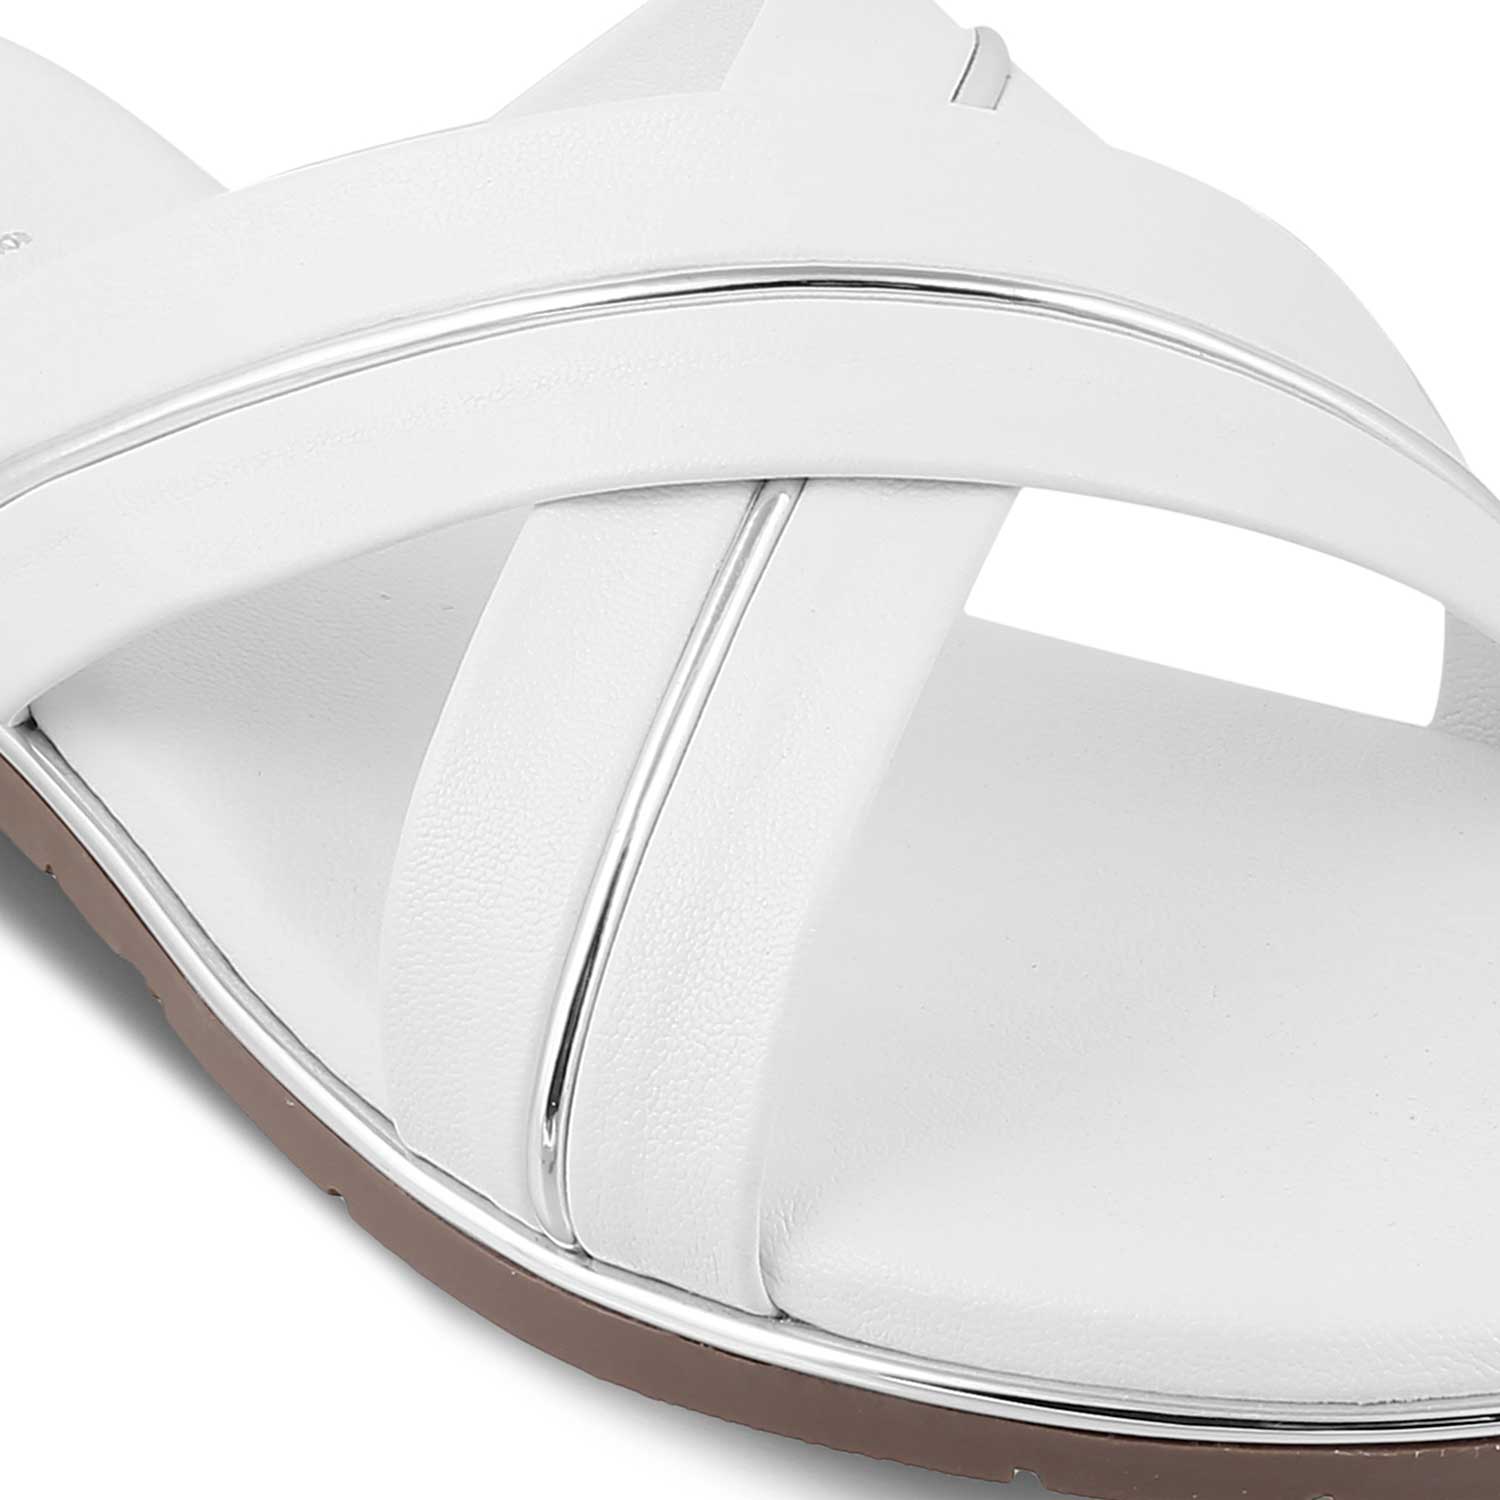 The Strep White Women's Casual Flats Tresmode - Tresmode